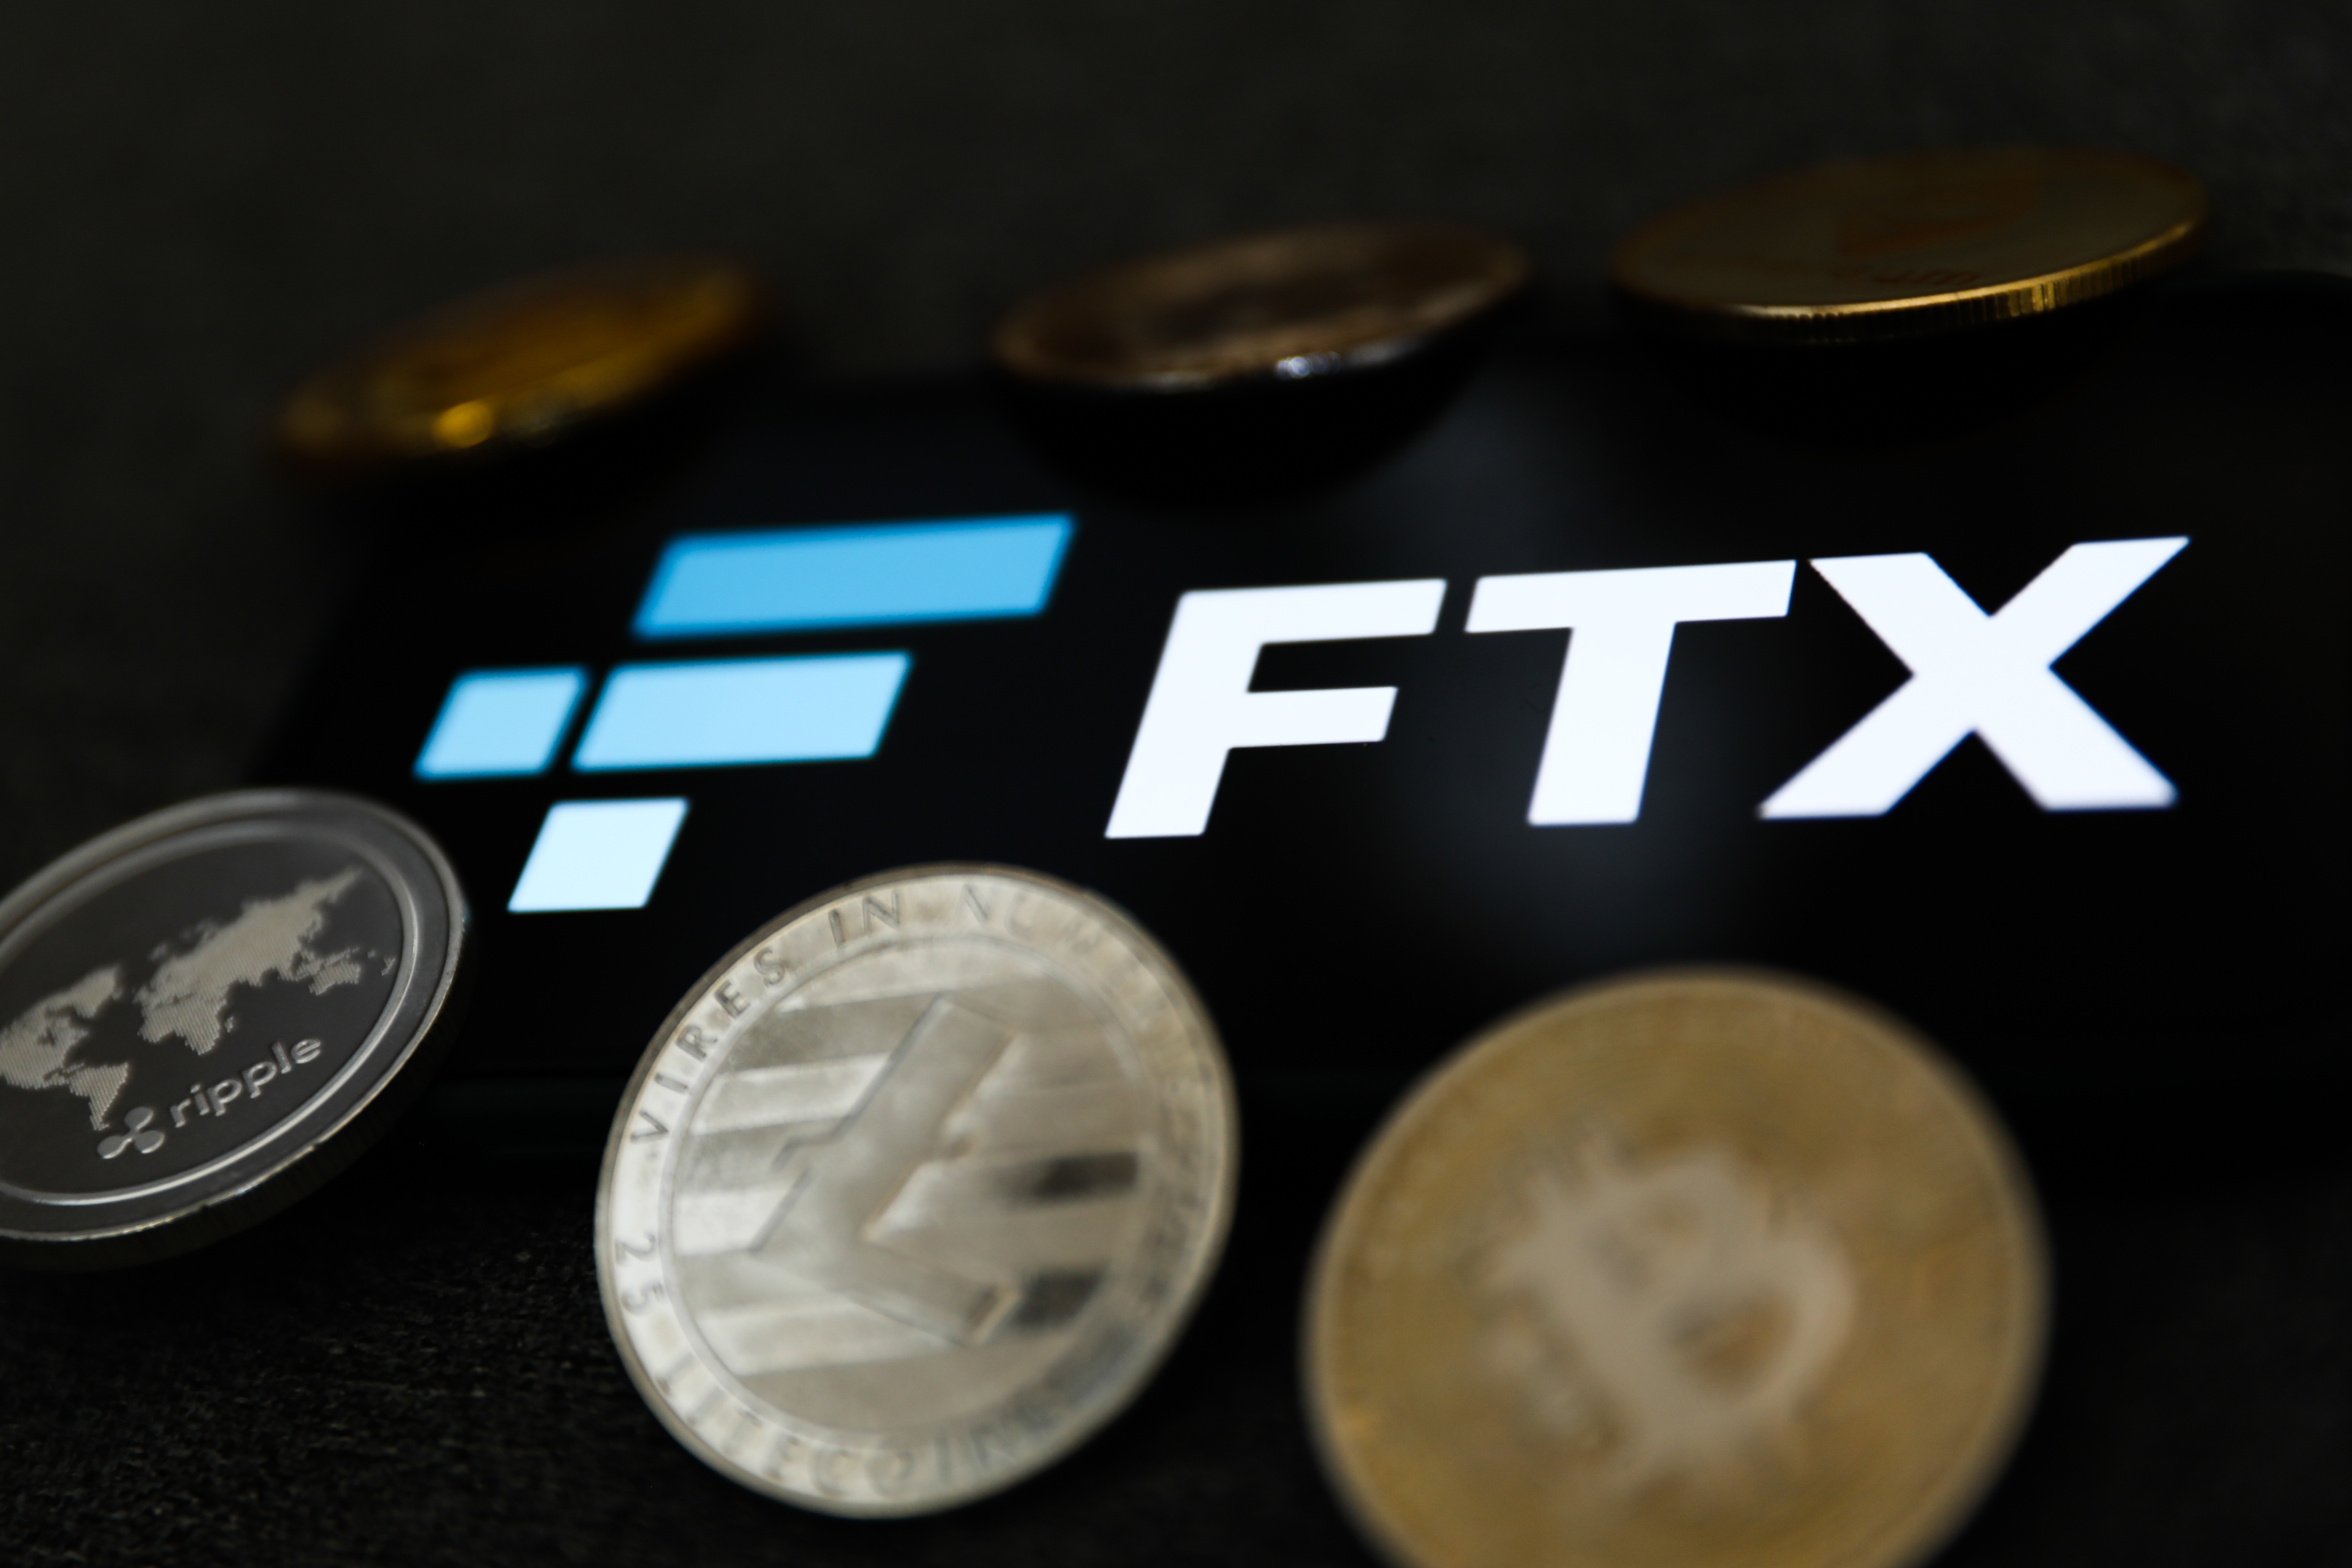 FTX logo displayed on a phone screen and representation of cryptocurrency are seen in this illustration photo taken in Krakow, Poland on February 16, 2022. (Jakub Porzycki–NurPhoto via Getty Images)